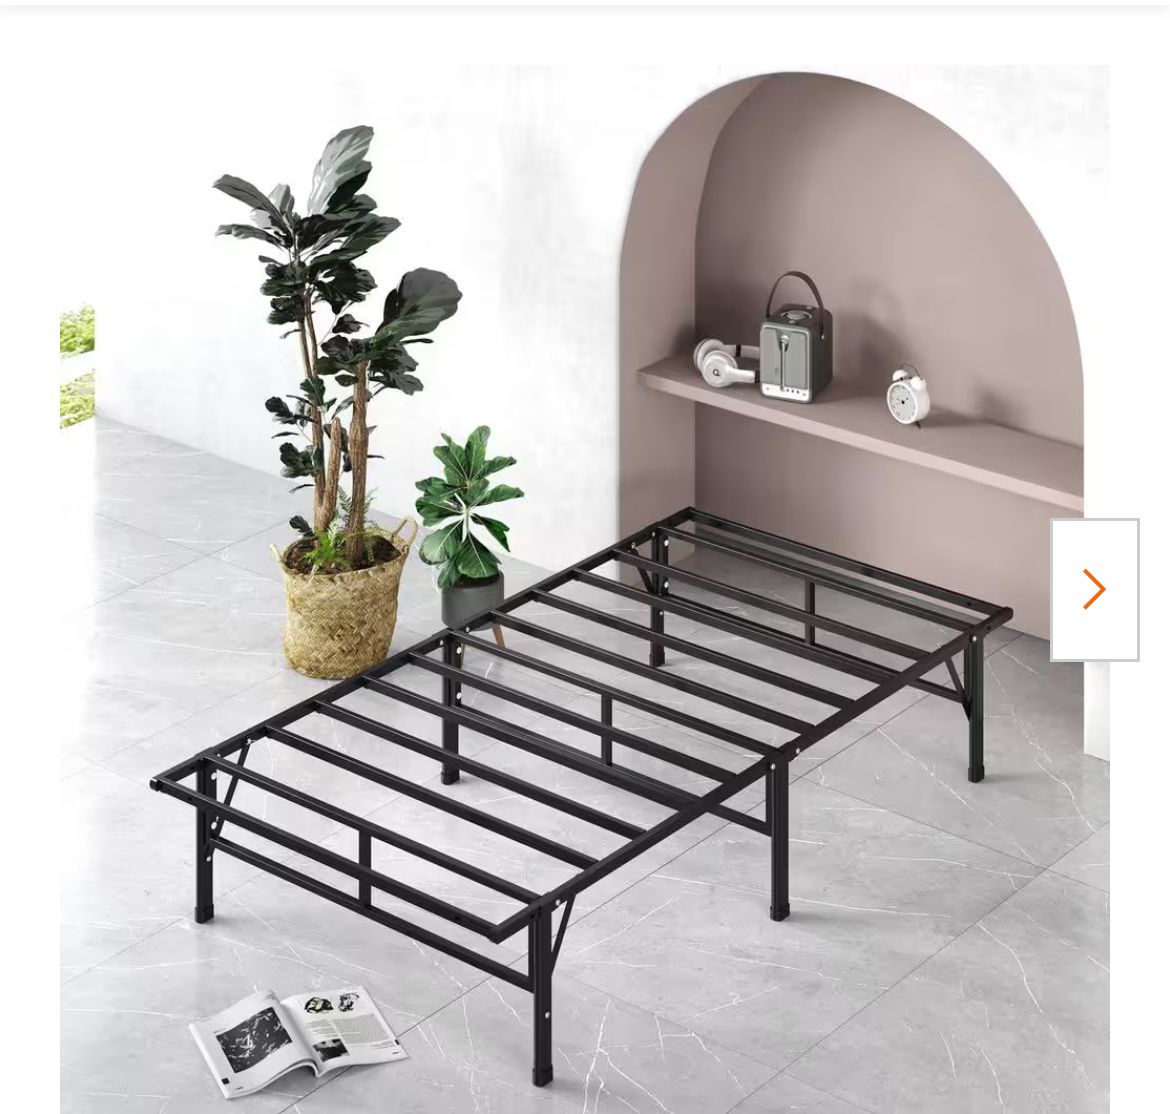 Anyone giving away a twin/full platform bed frame